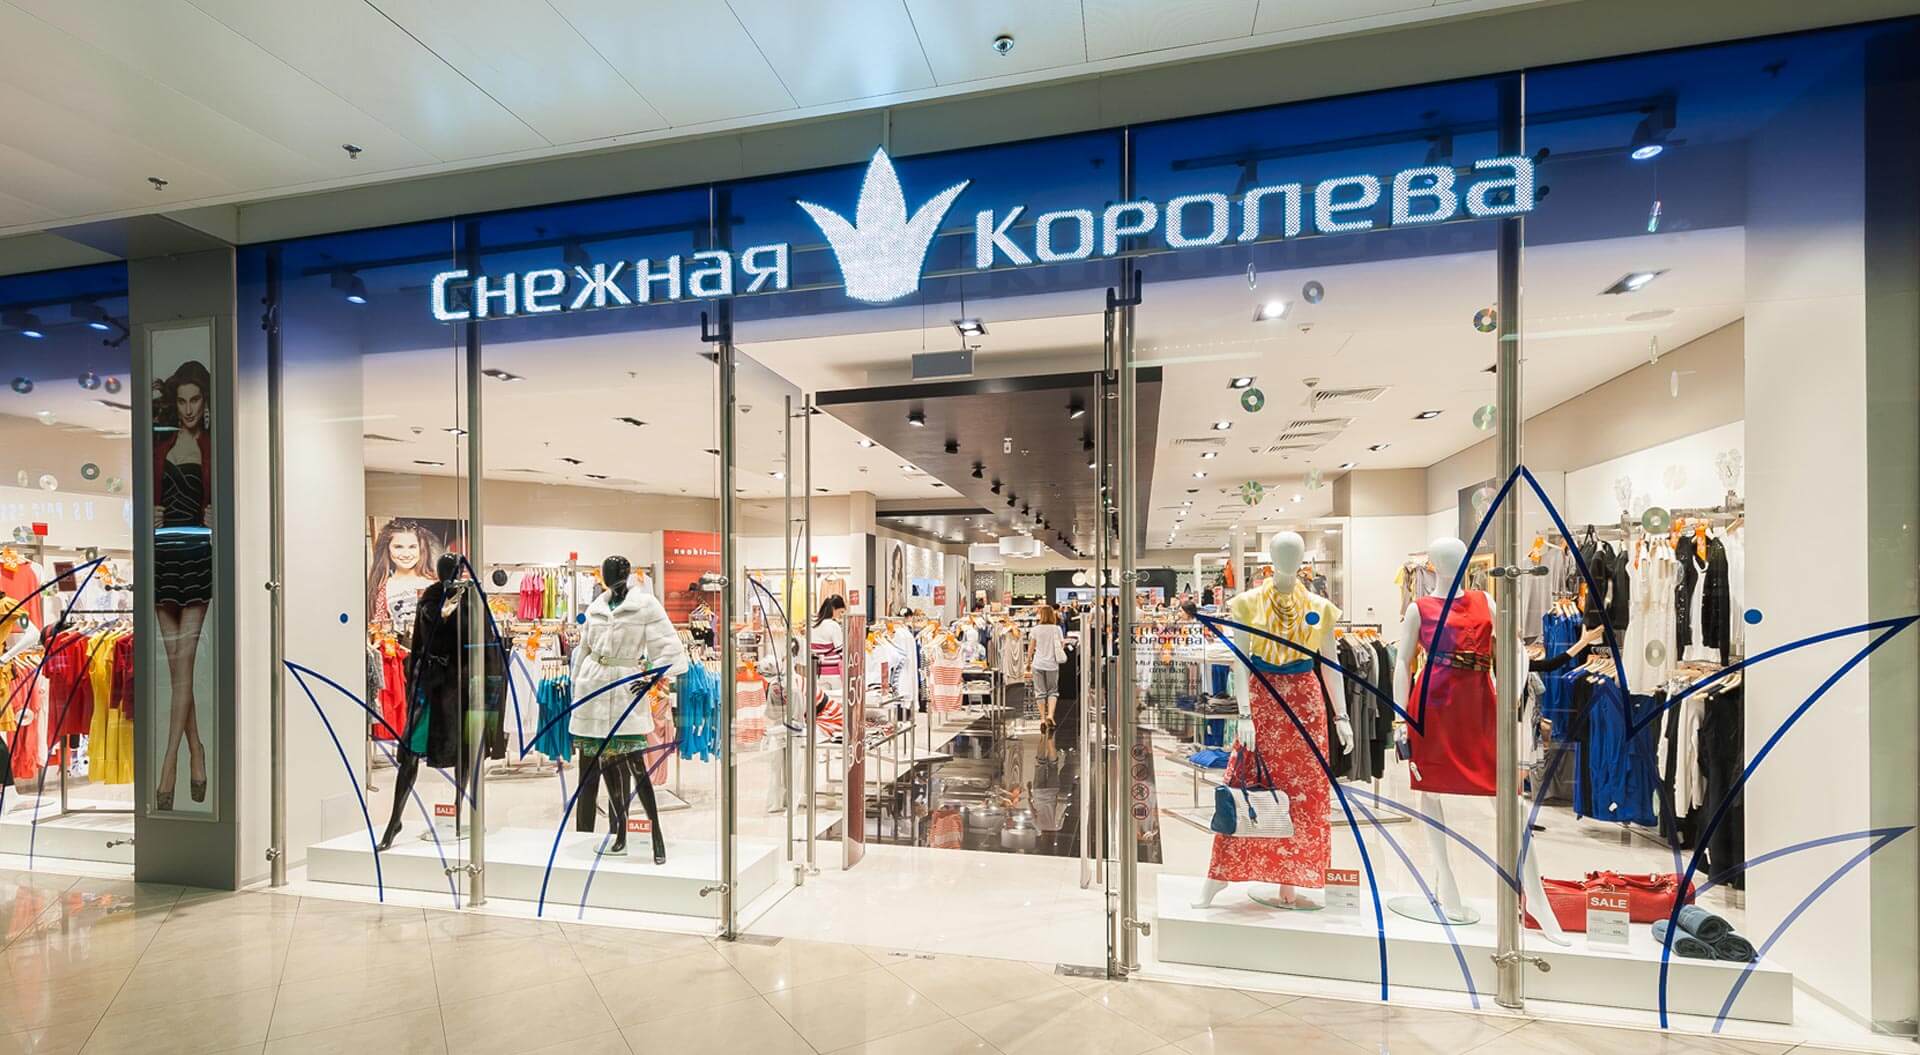 Hypermarket fashion store, best retail interior design, inspiring concepts, rebrand, new trends, ideas, marketing strategy, in-store communications format planning, shop layout, Snow Queen Russia